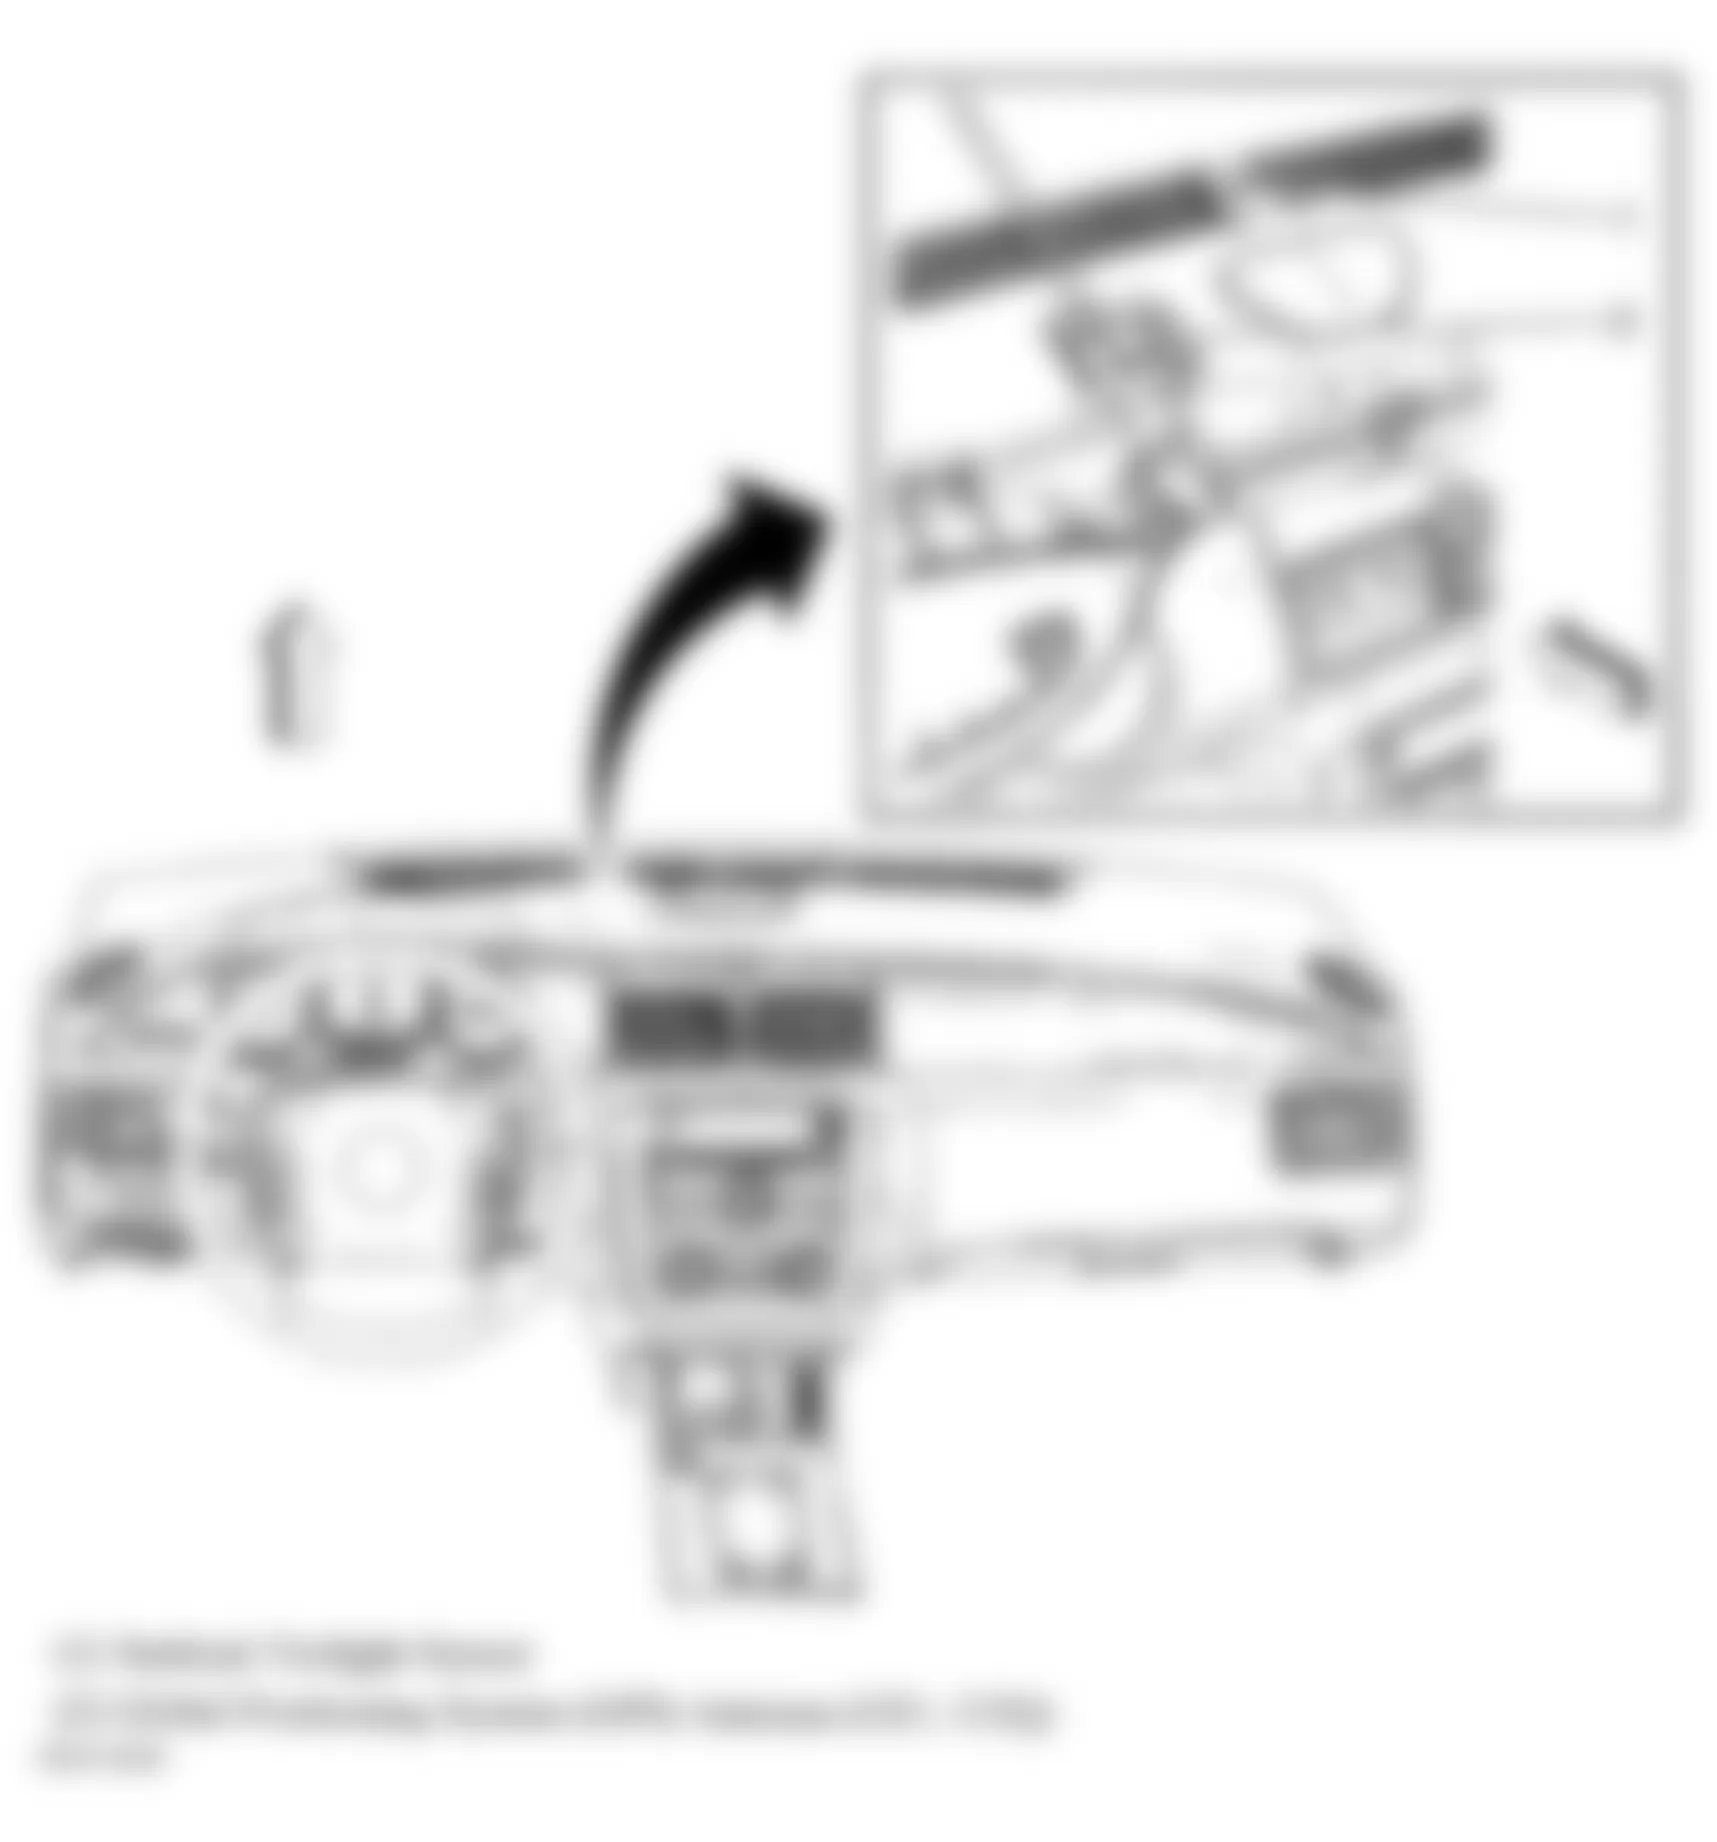 Buick Lucerne CXL 2006 - Component Locations -  Top Center Of Dash